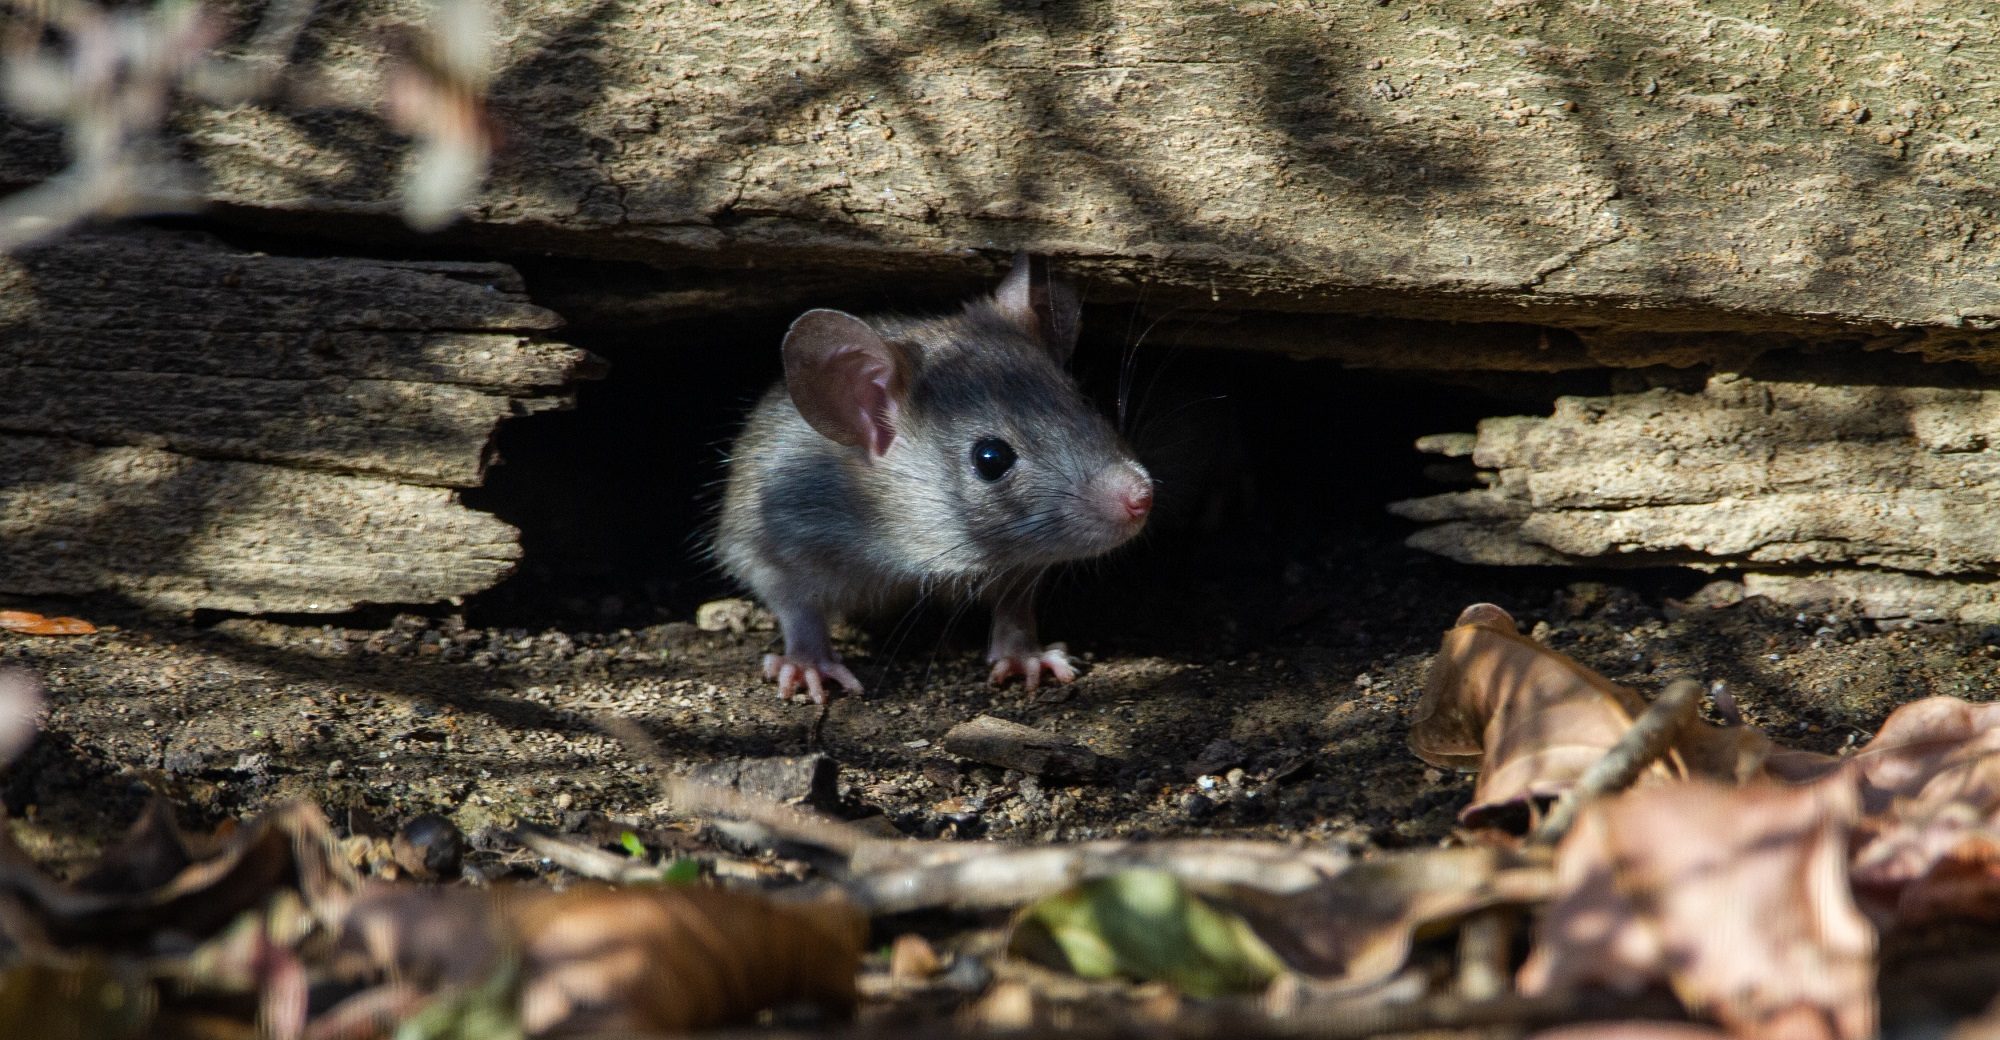 Image shows rat in the woods